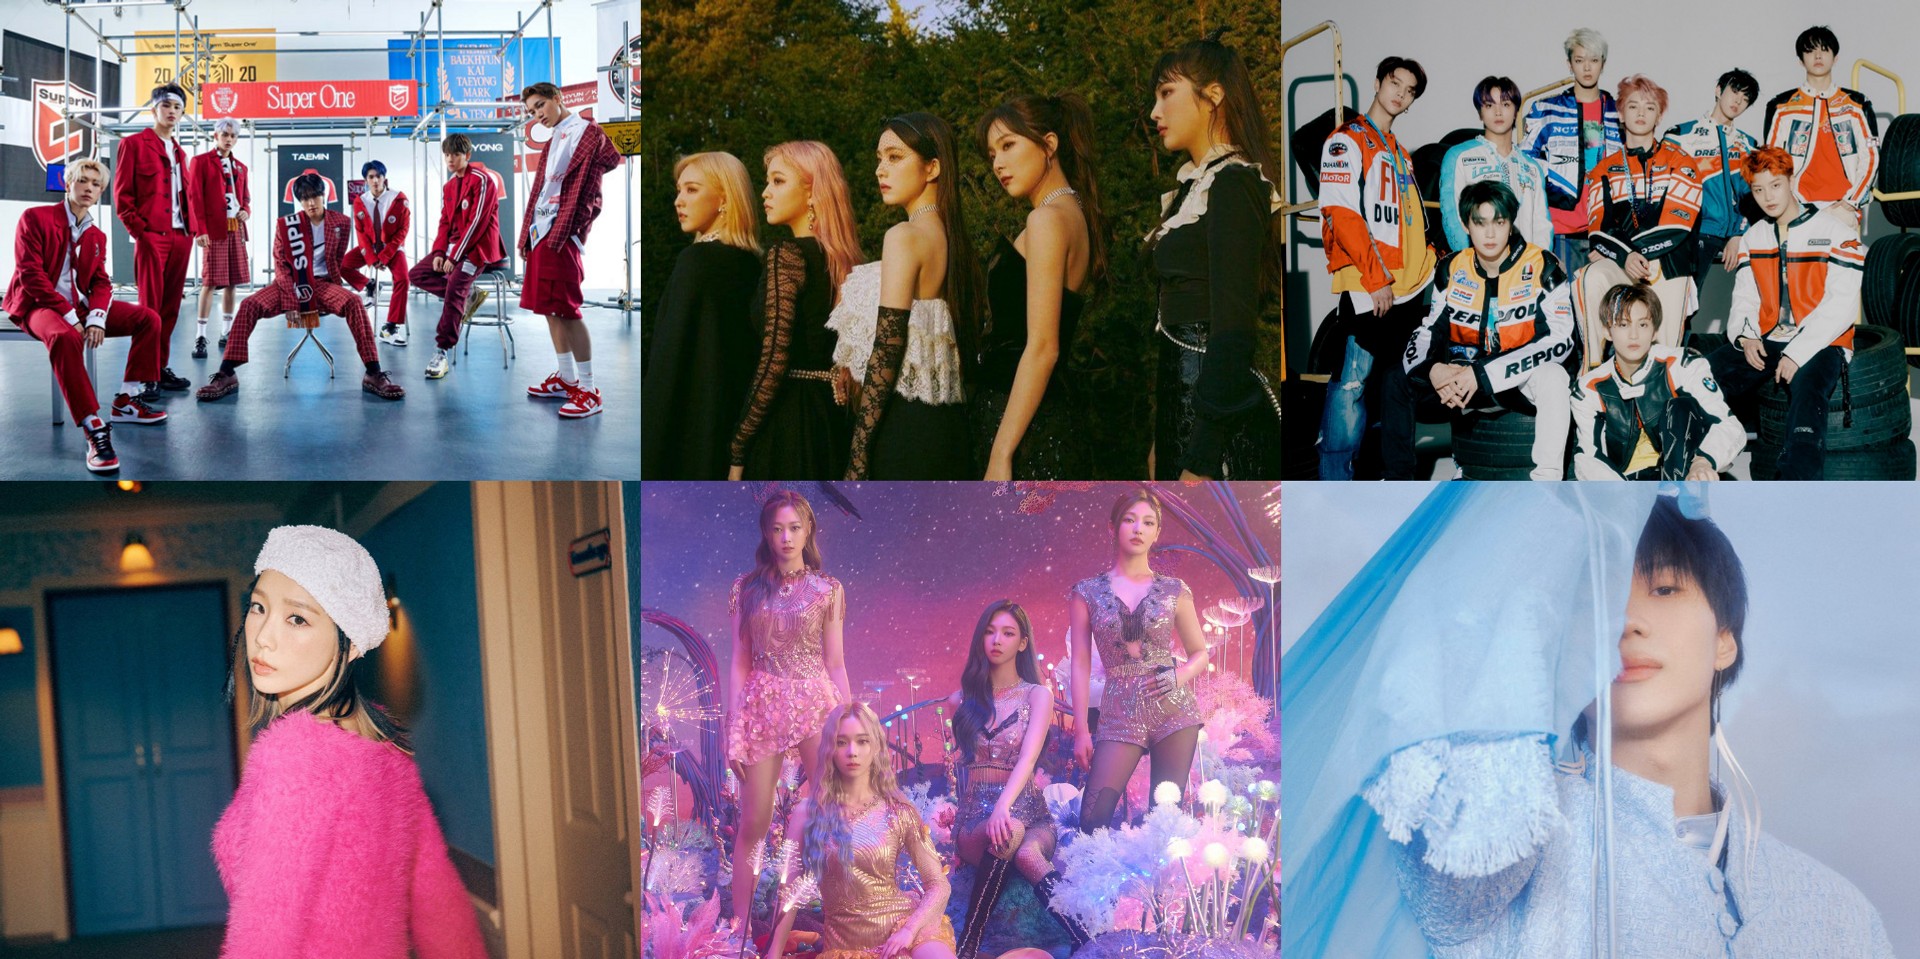 SMTOWN LIVE “Culture Humanity” online concert unveils lineup – aespa, NCT 127, Taemin, Taeyeon, SuperM, Red Velvet, and more